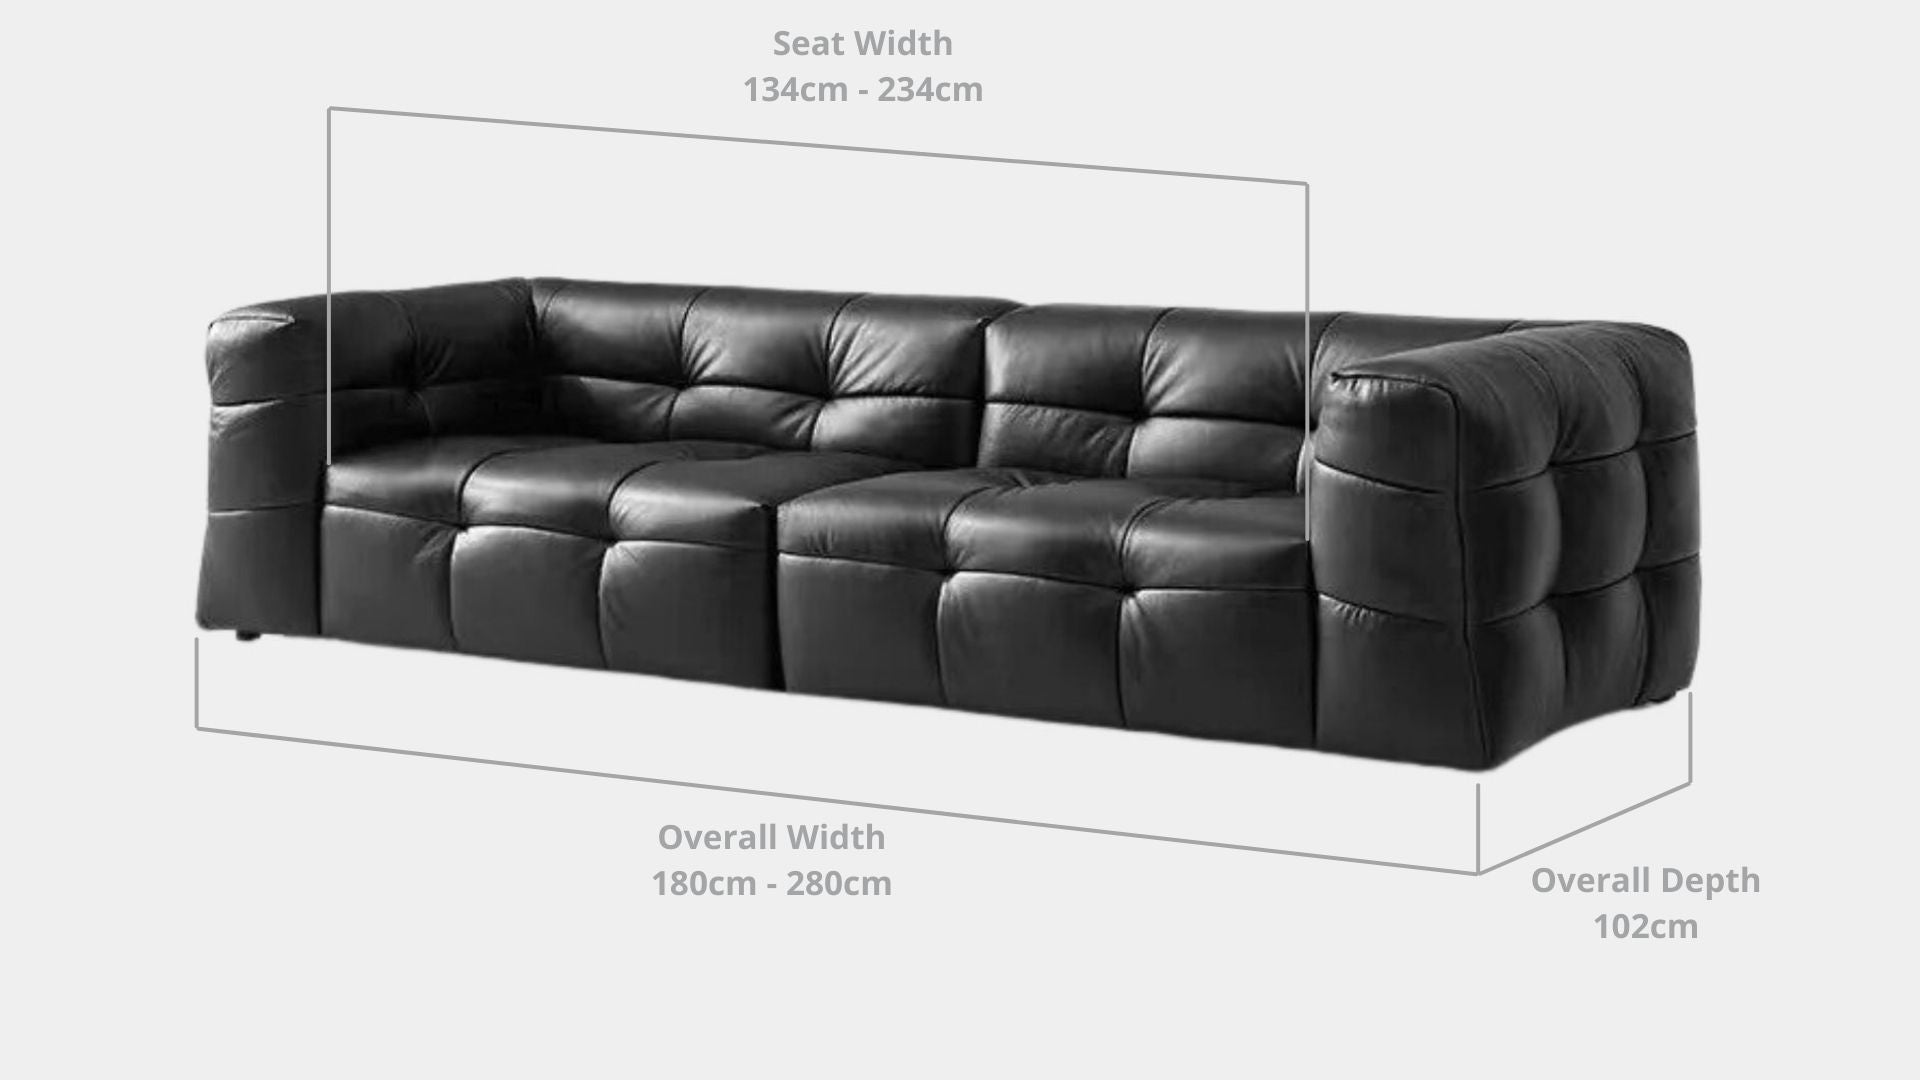 Details the key dimensions in terms of overall width, overall depth and seat width for Cutey Half Leather Sofa